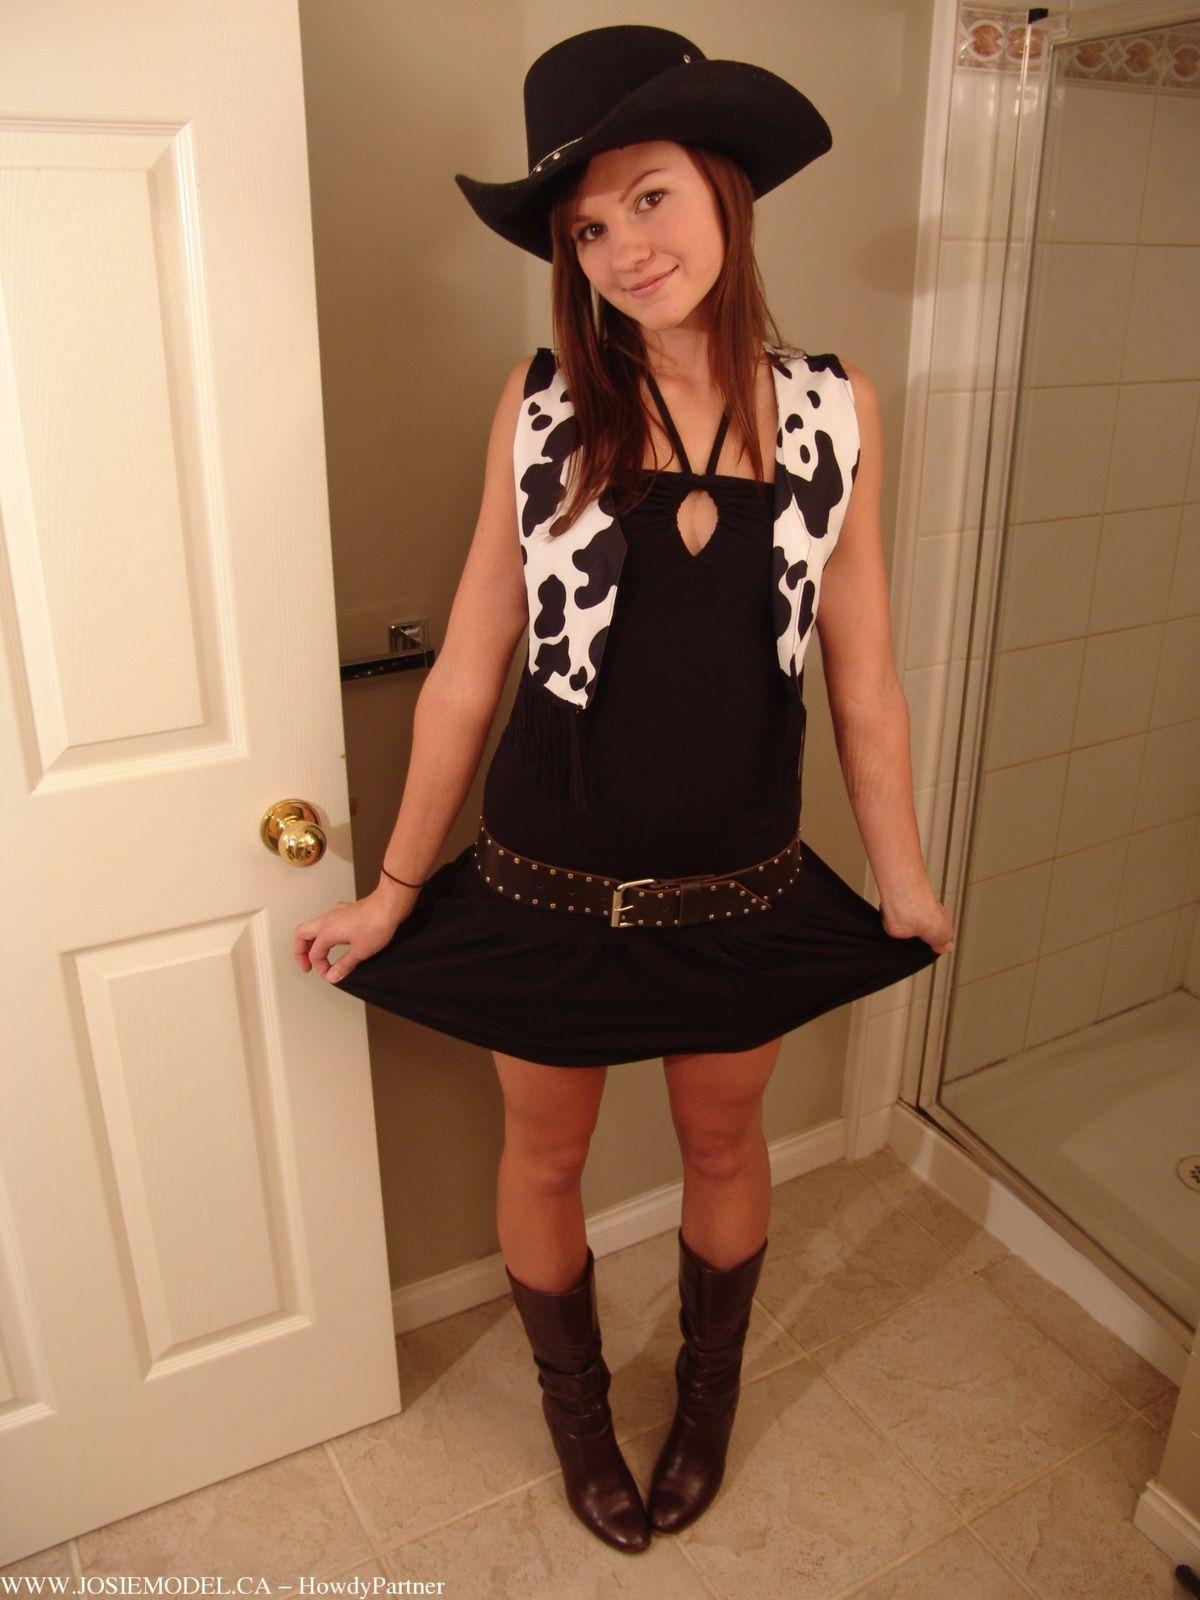 Pictures of teen porn Josie Model dressed as your sexy cowgirl #55708541